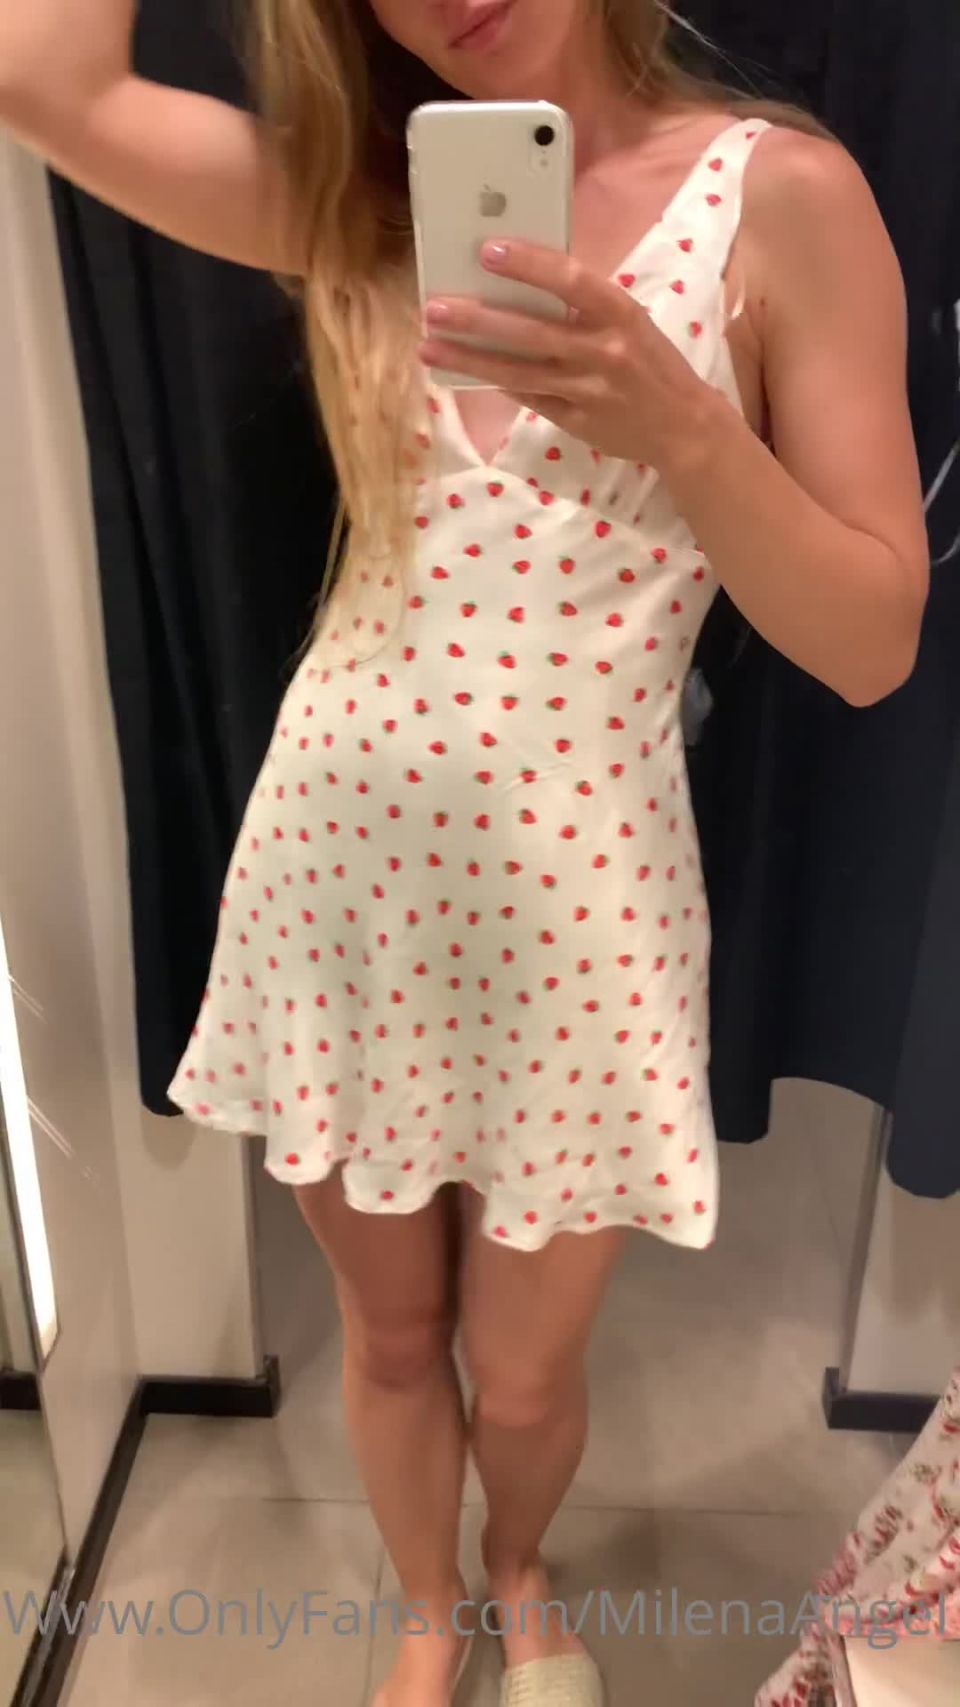 Milena Angel () Milenaangel - i got a shopping day guess which one i bought fittingroom 17-06-2021